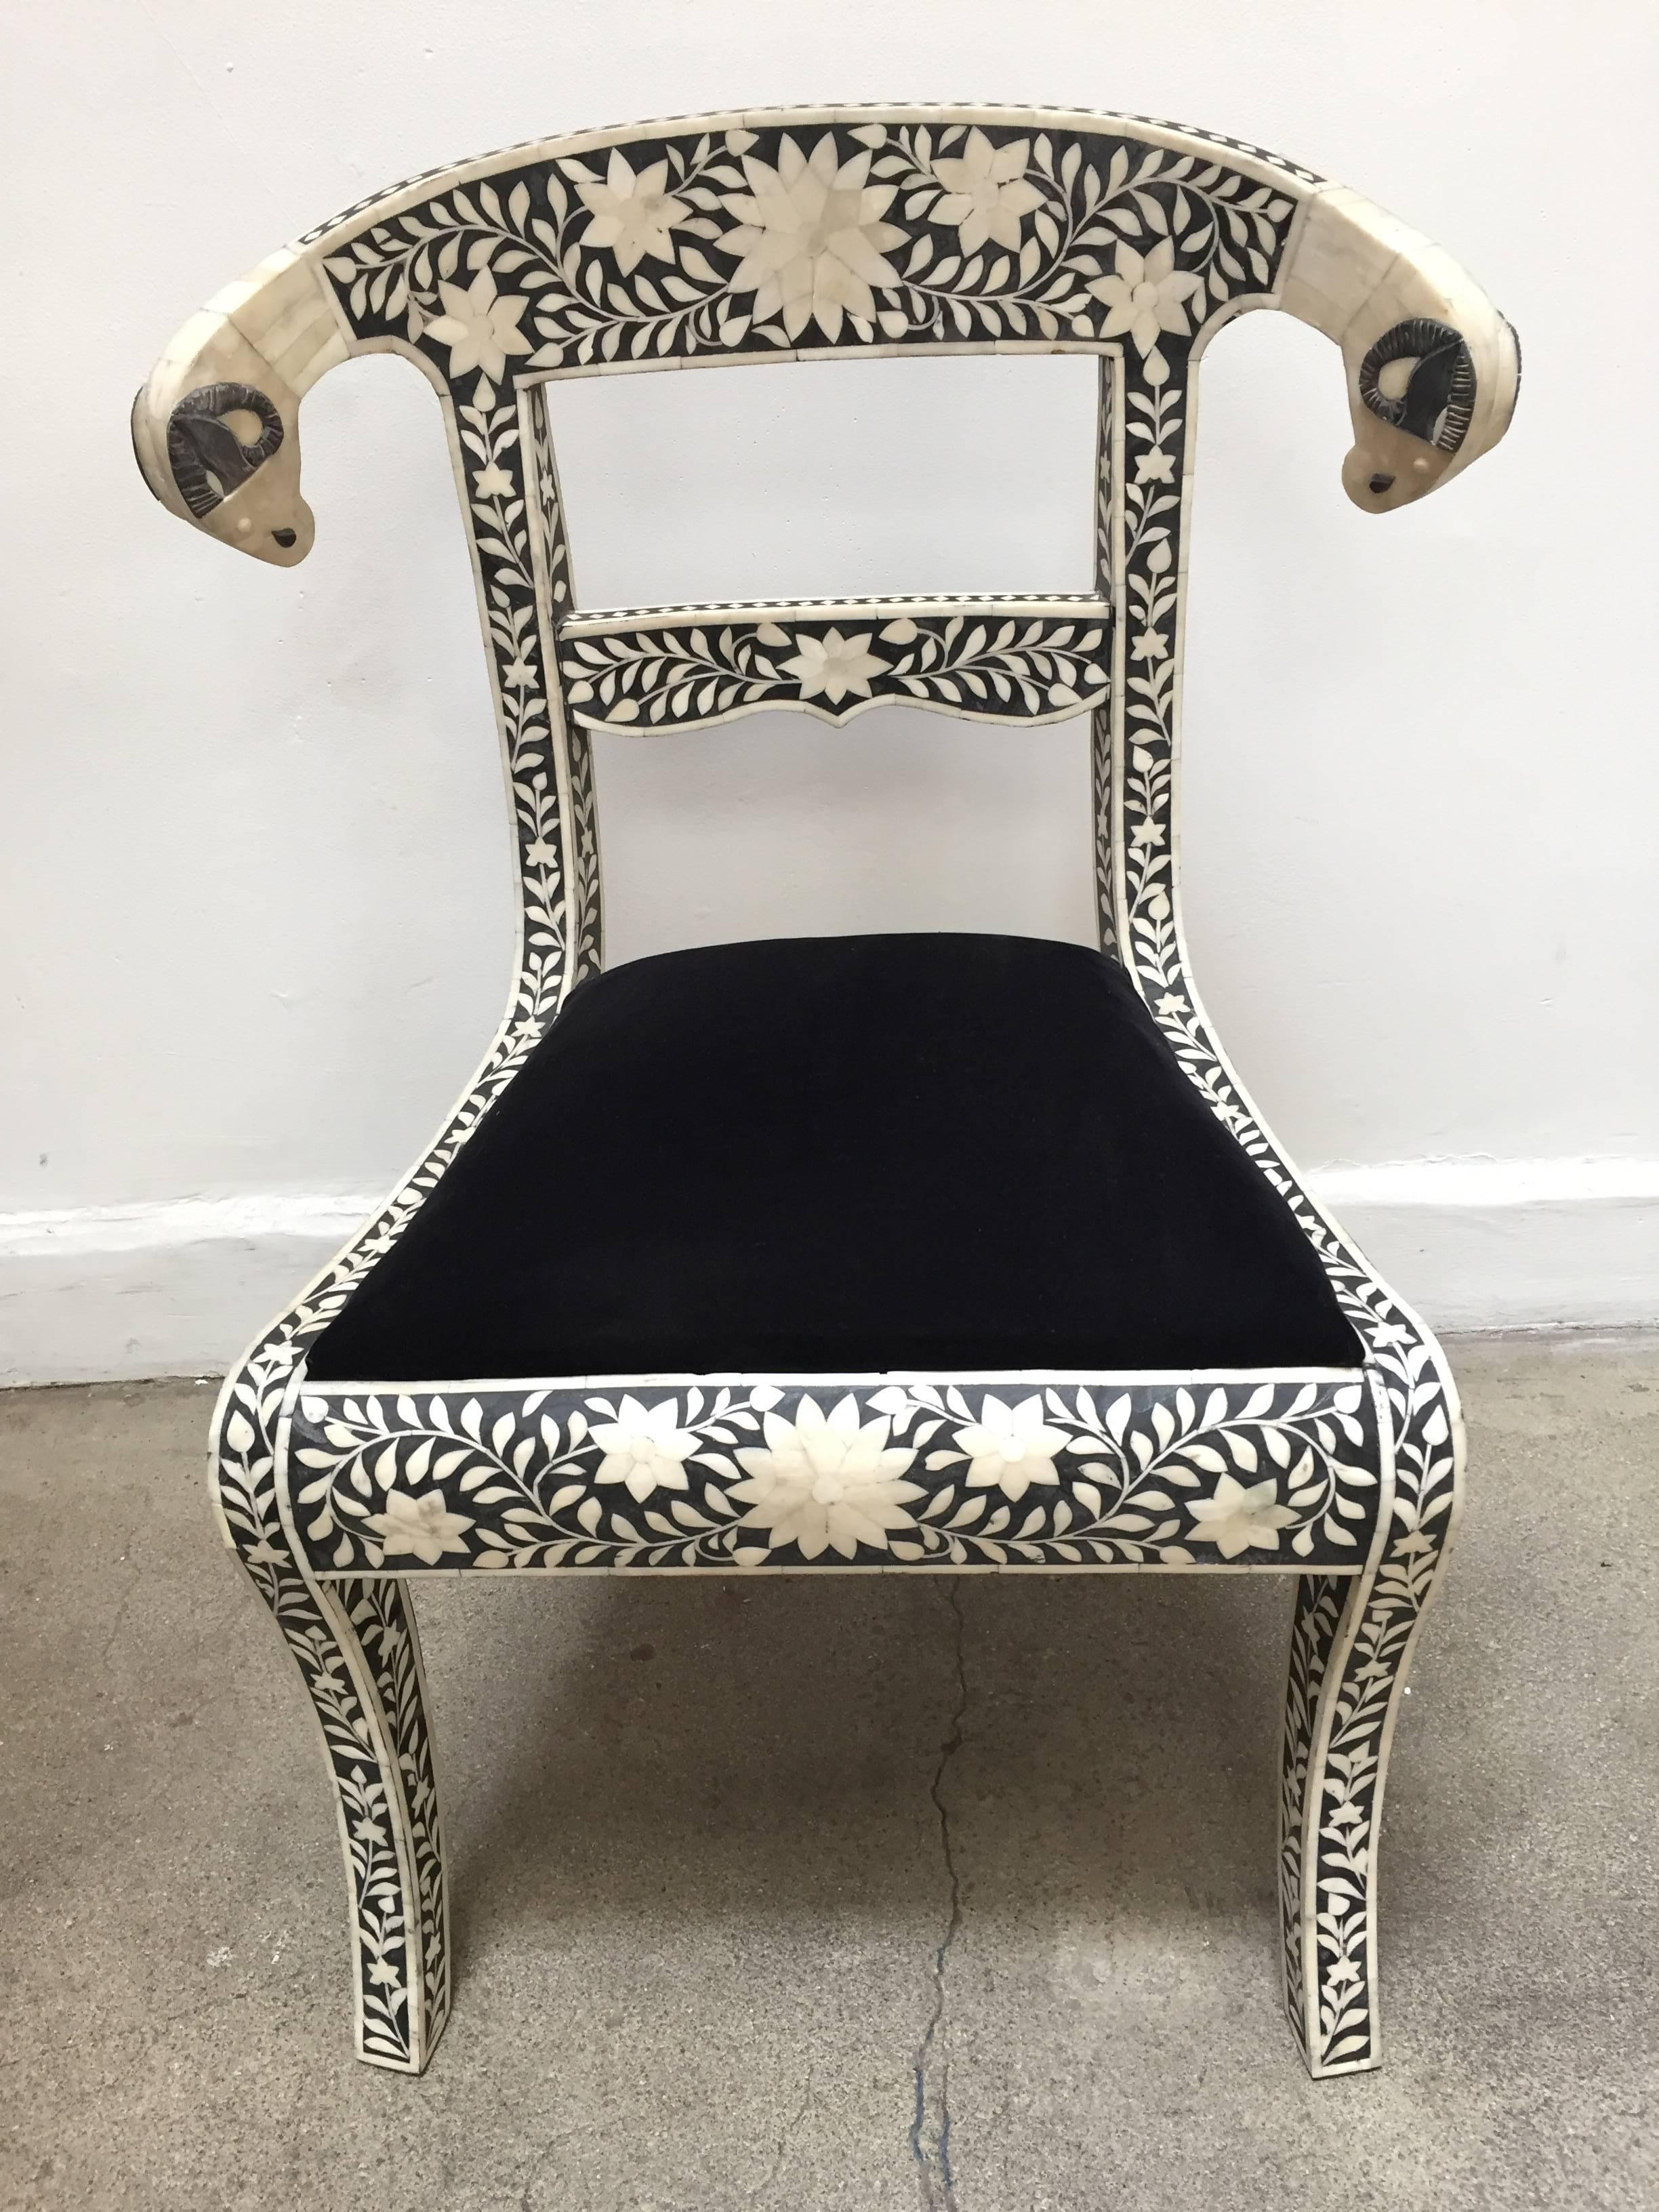 Pair of Anglo-Indian Mughal black and white dowry side chairs with ram's head accents.
These stunning chairs feature a wooden frame inlaid with intricate and detailed floral bone inlay design in ivory and black color and scrolling ram's heads